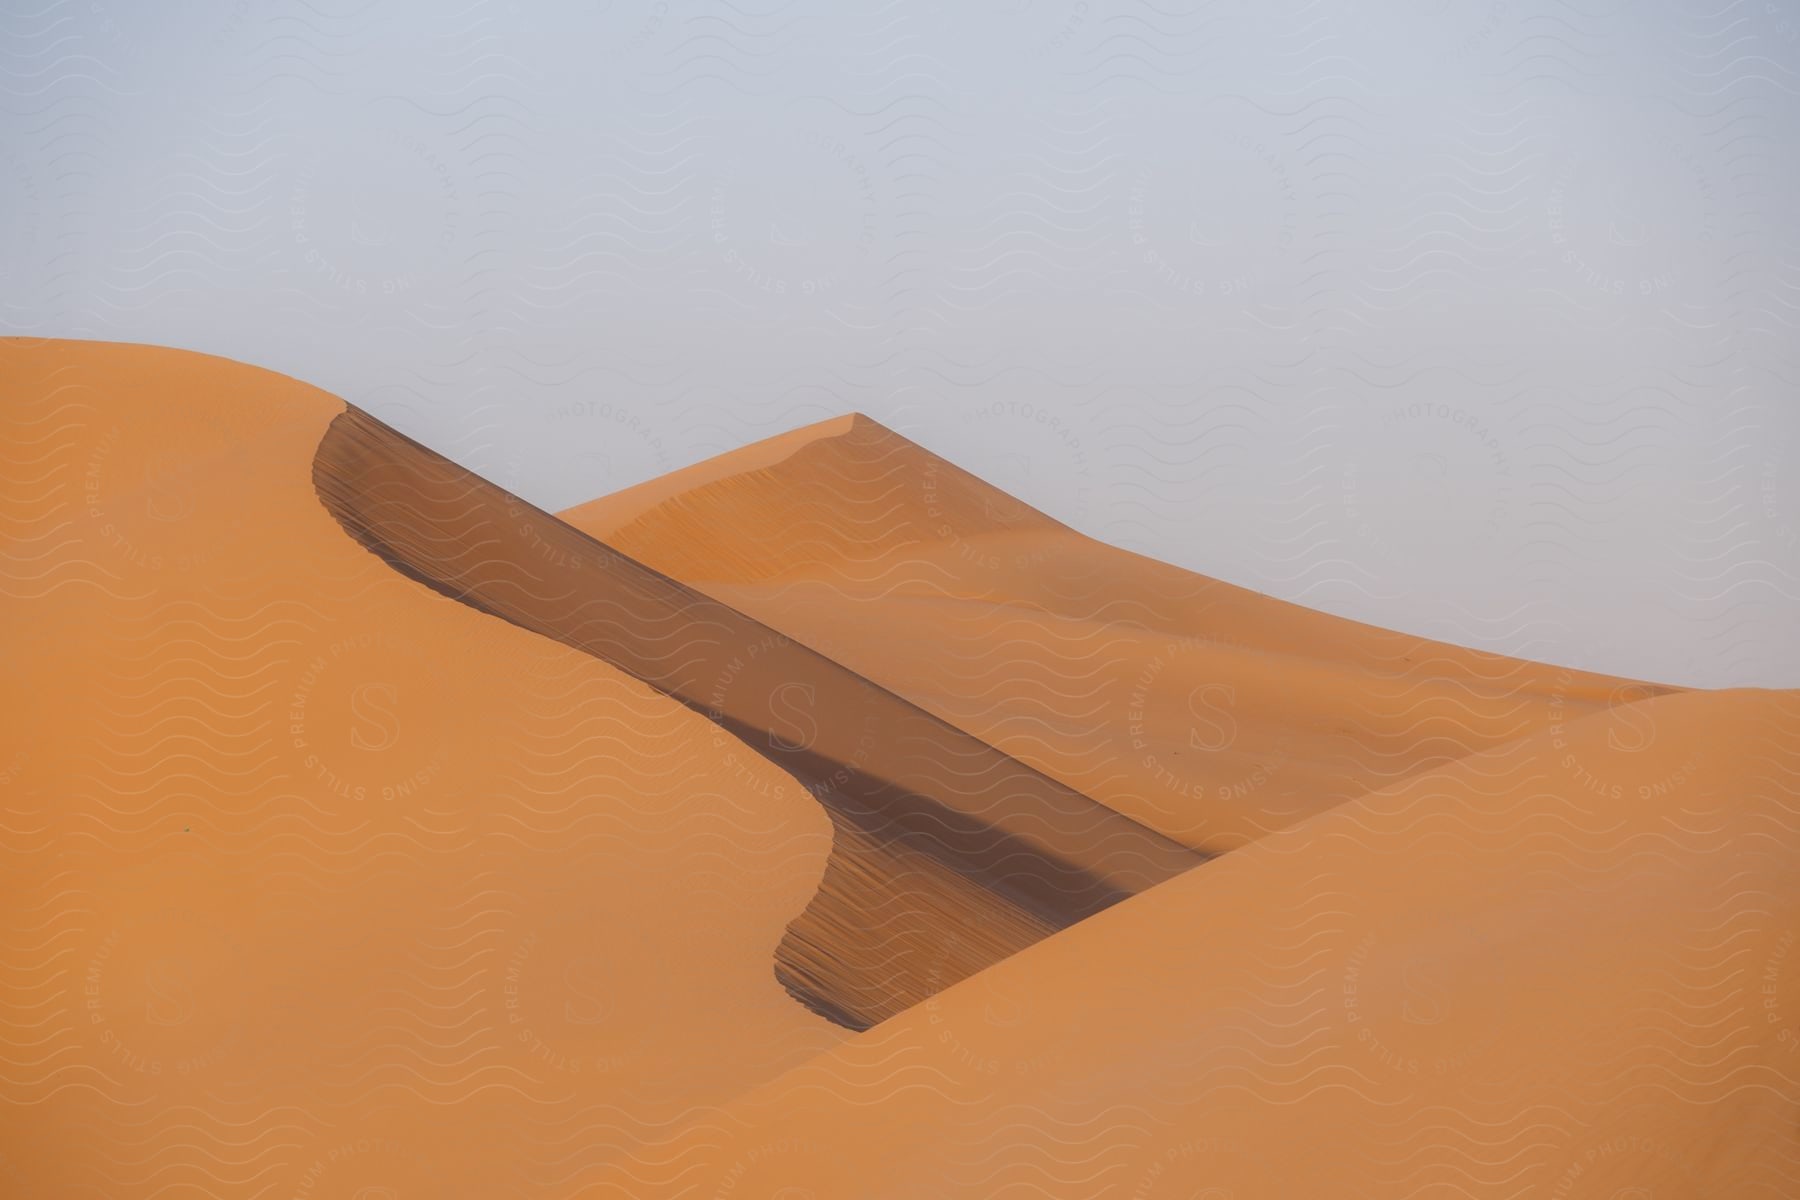 A sand dune rises from the barren desert on a sunny day.